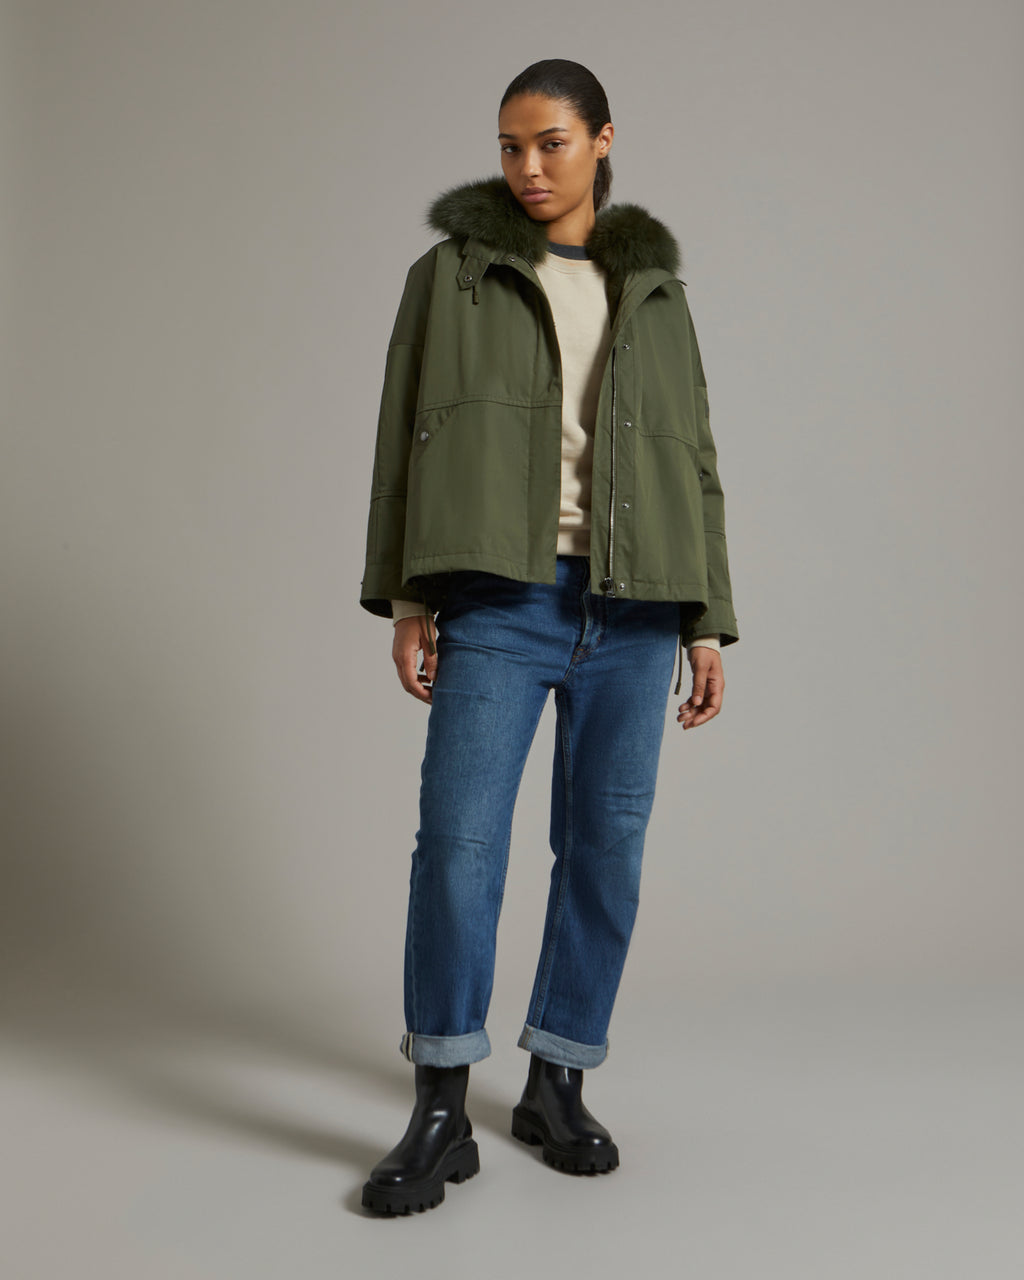 Cropped parka in - Yves with Salomon fur khaki – Yves fox fabric - technical Salomon US waterproof rabbit and